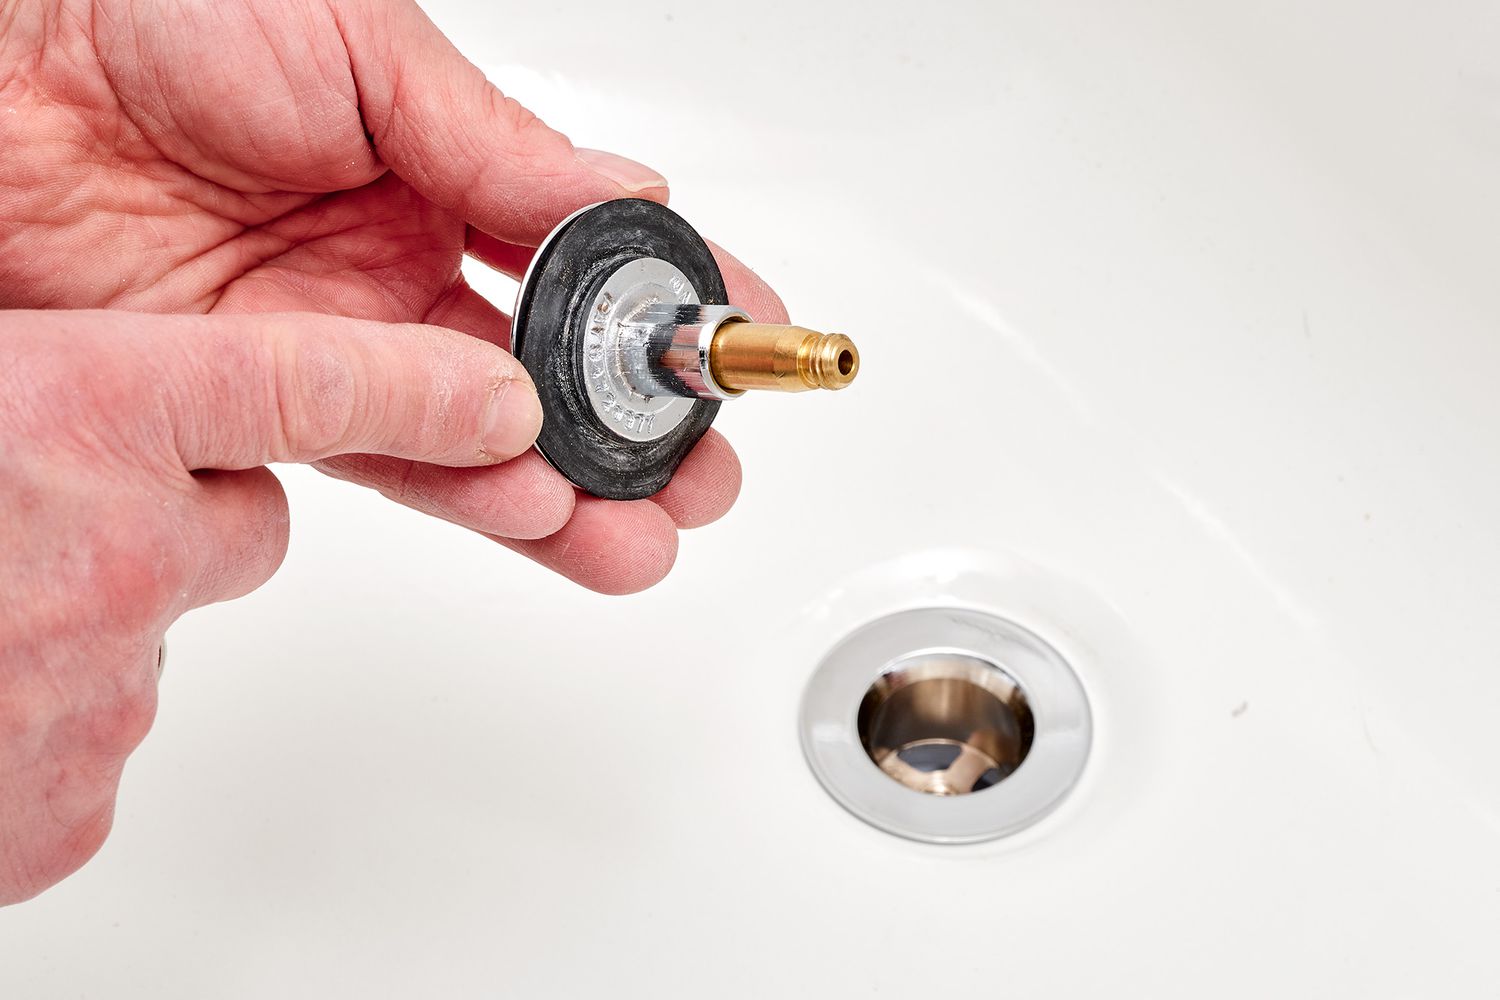 How To Replace A Bathroom Sink Stopper